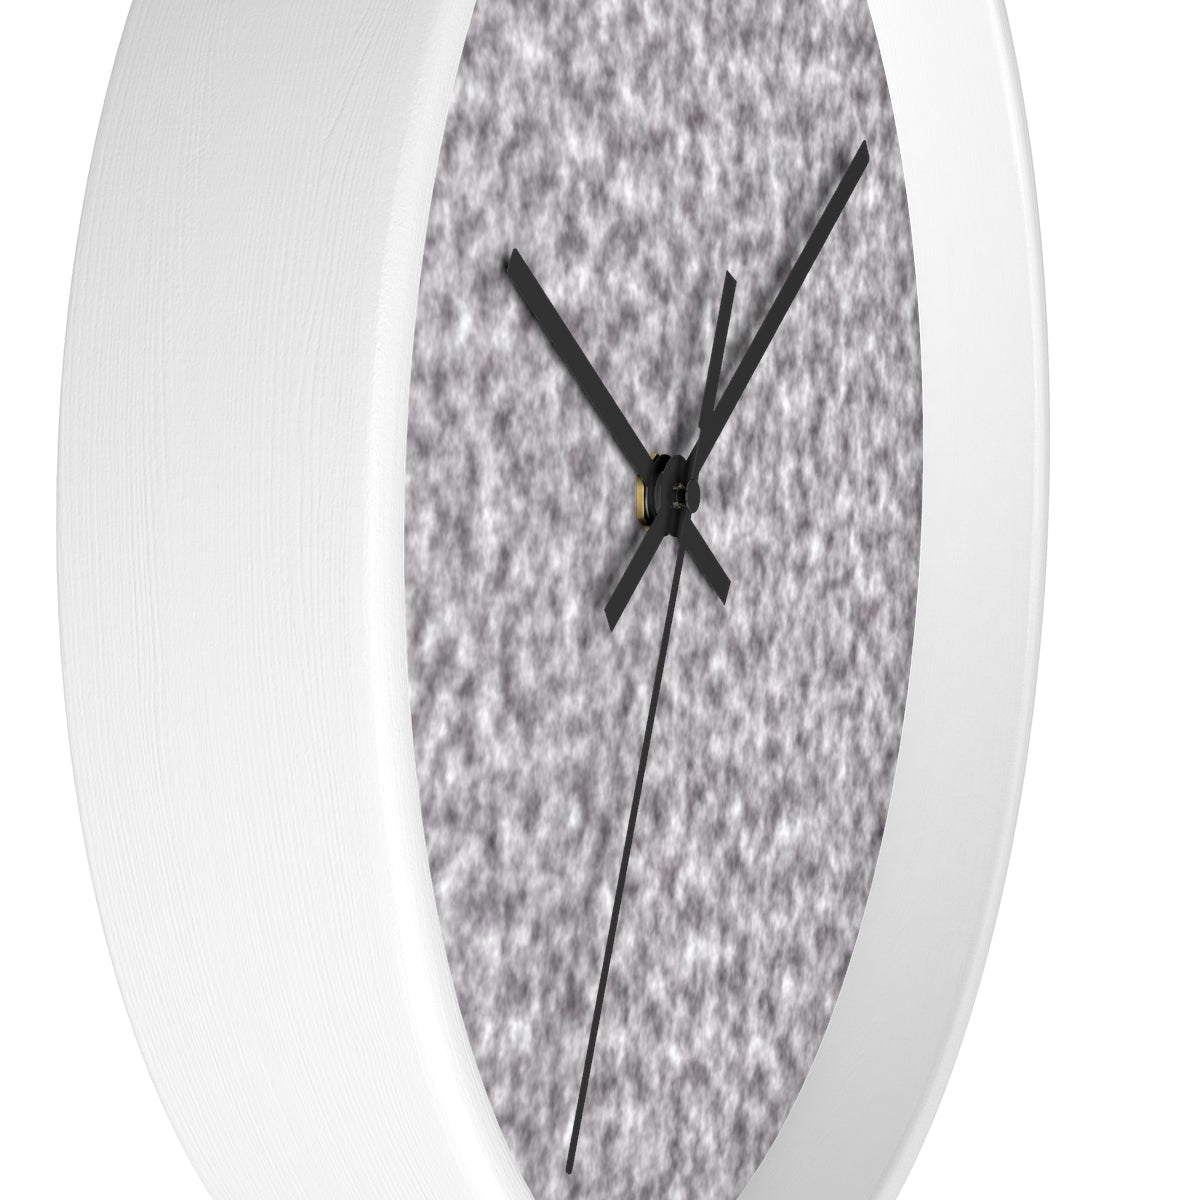 Gray and White Clouds Wall Clock